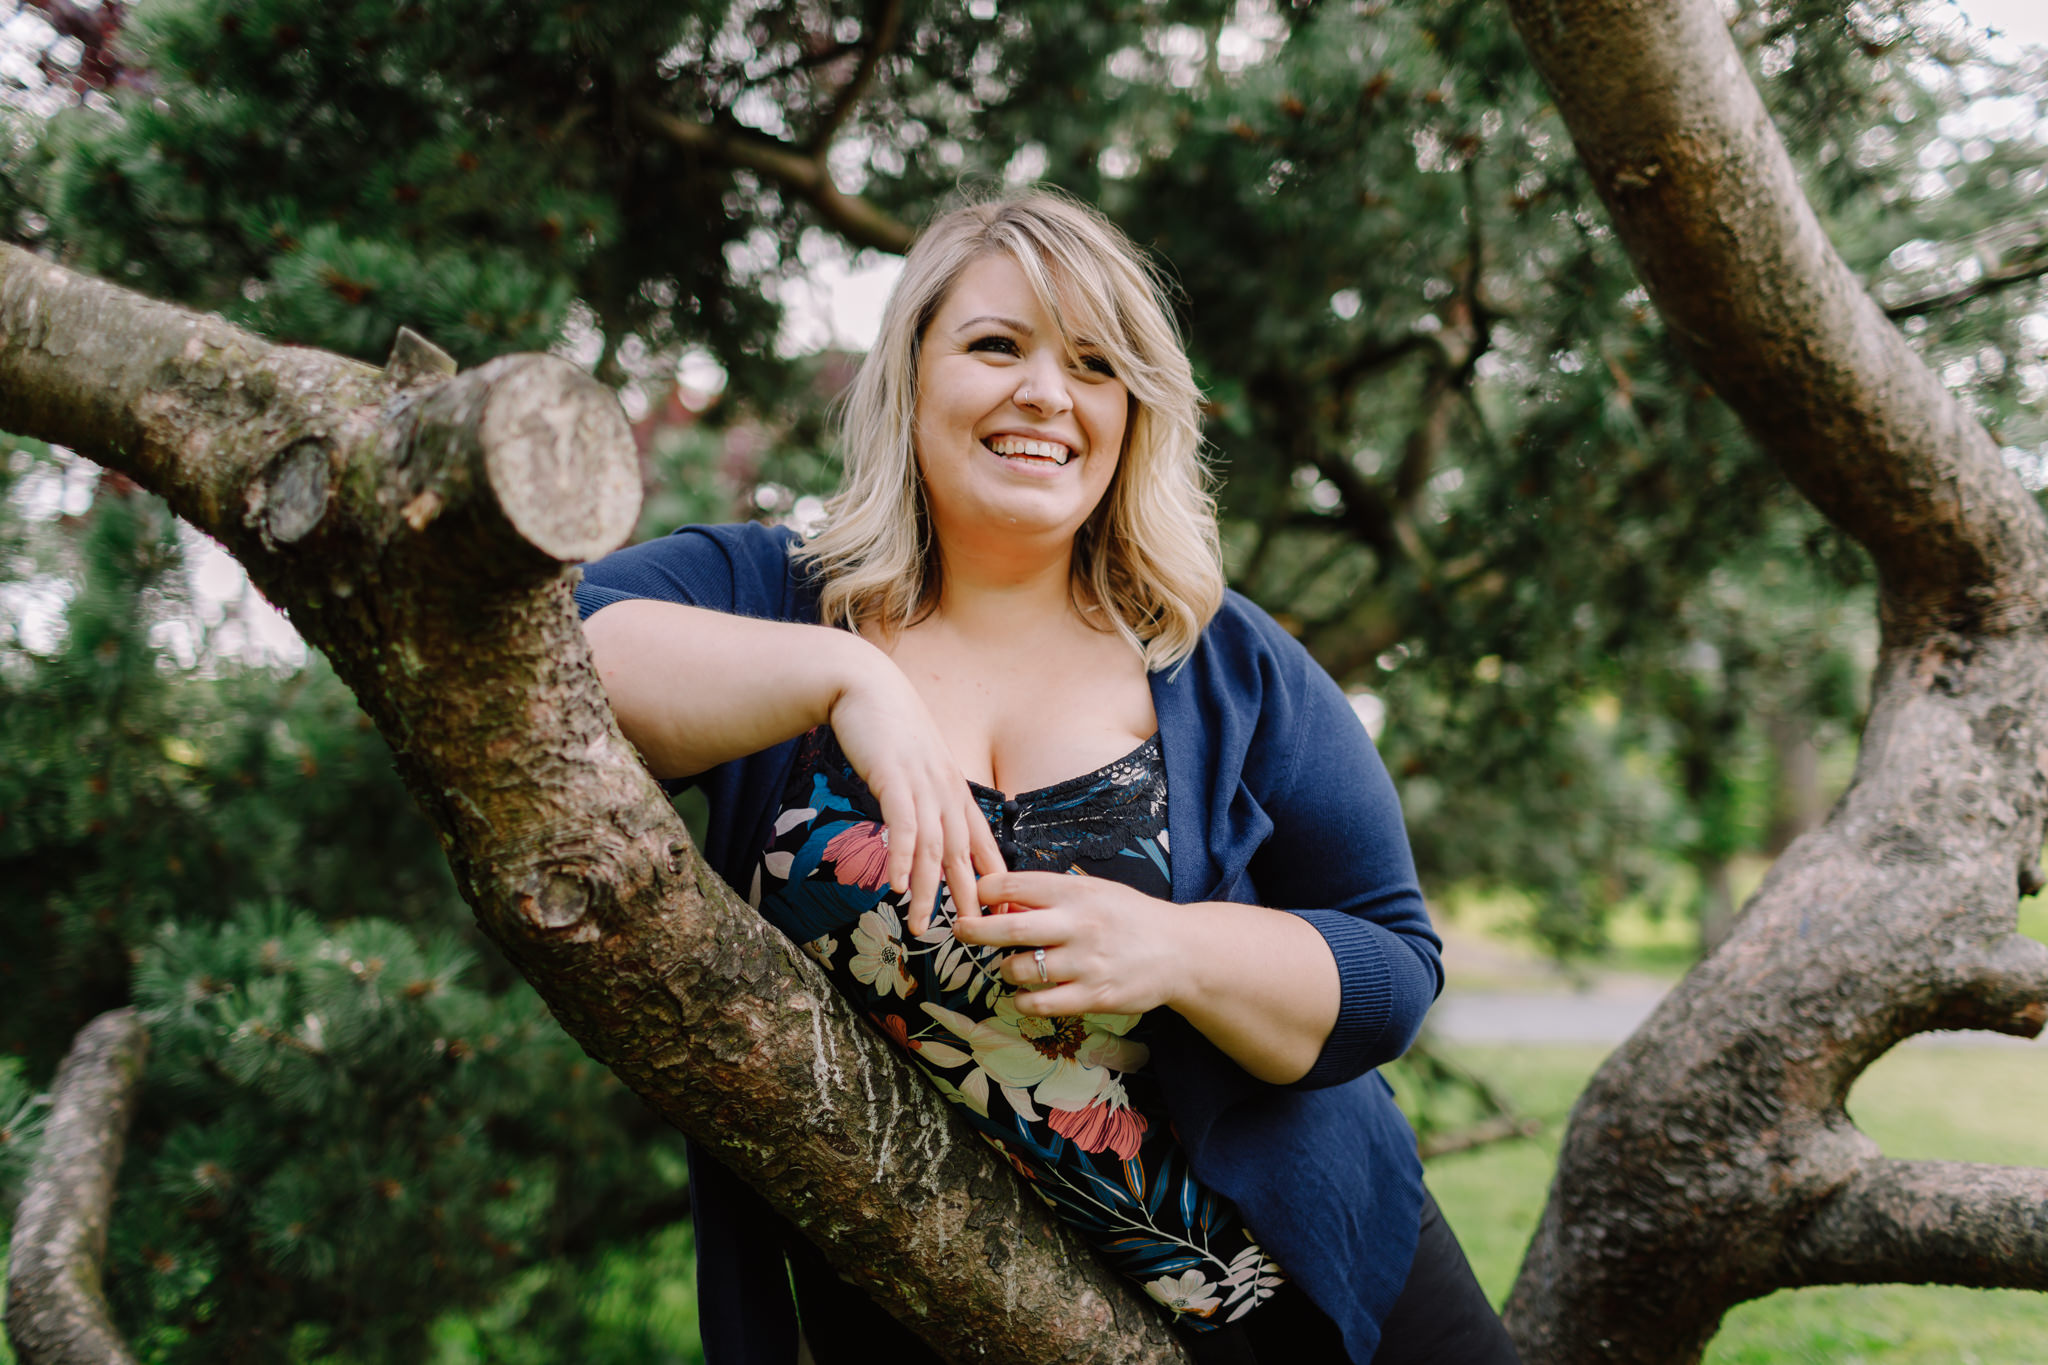 Woman leans on tree branch smiling